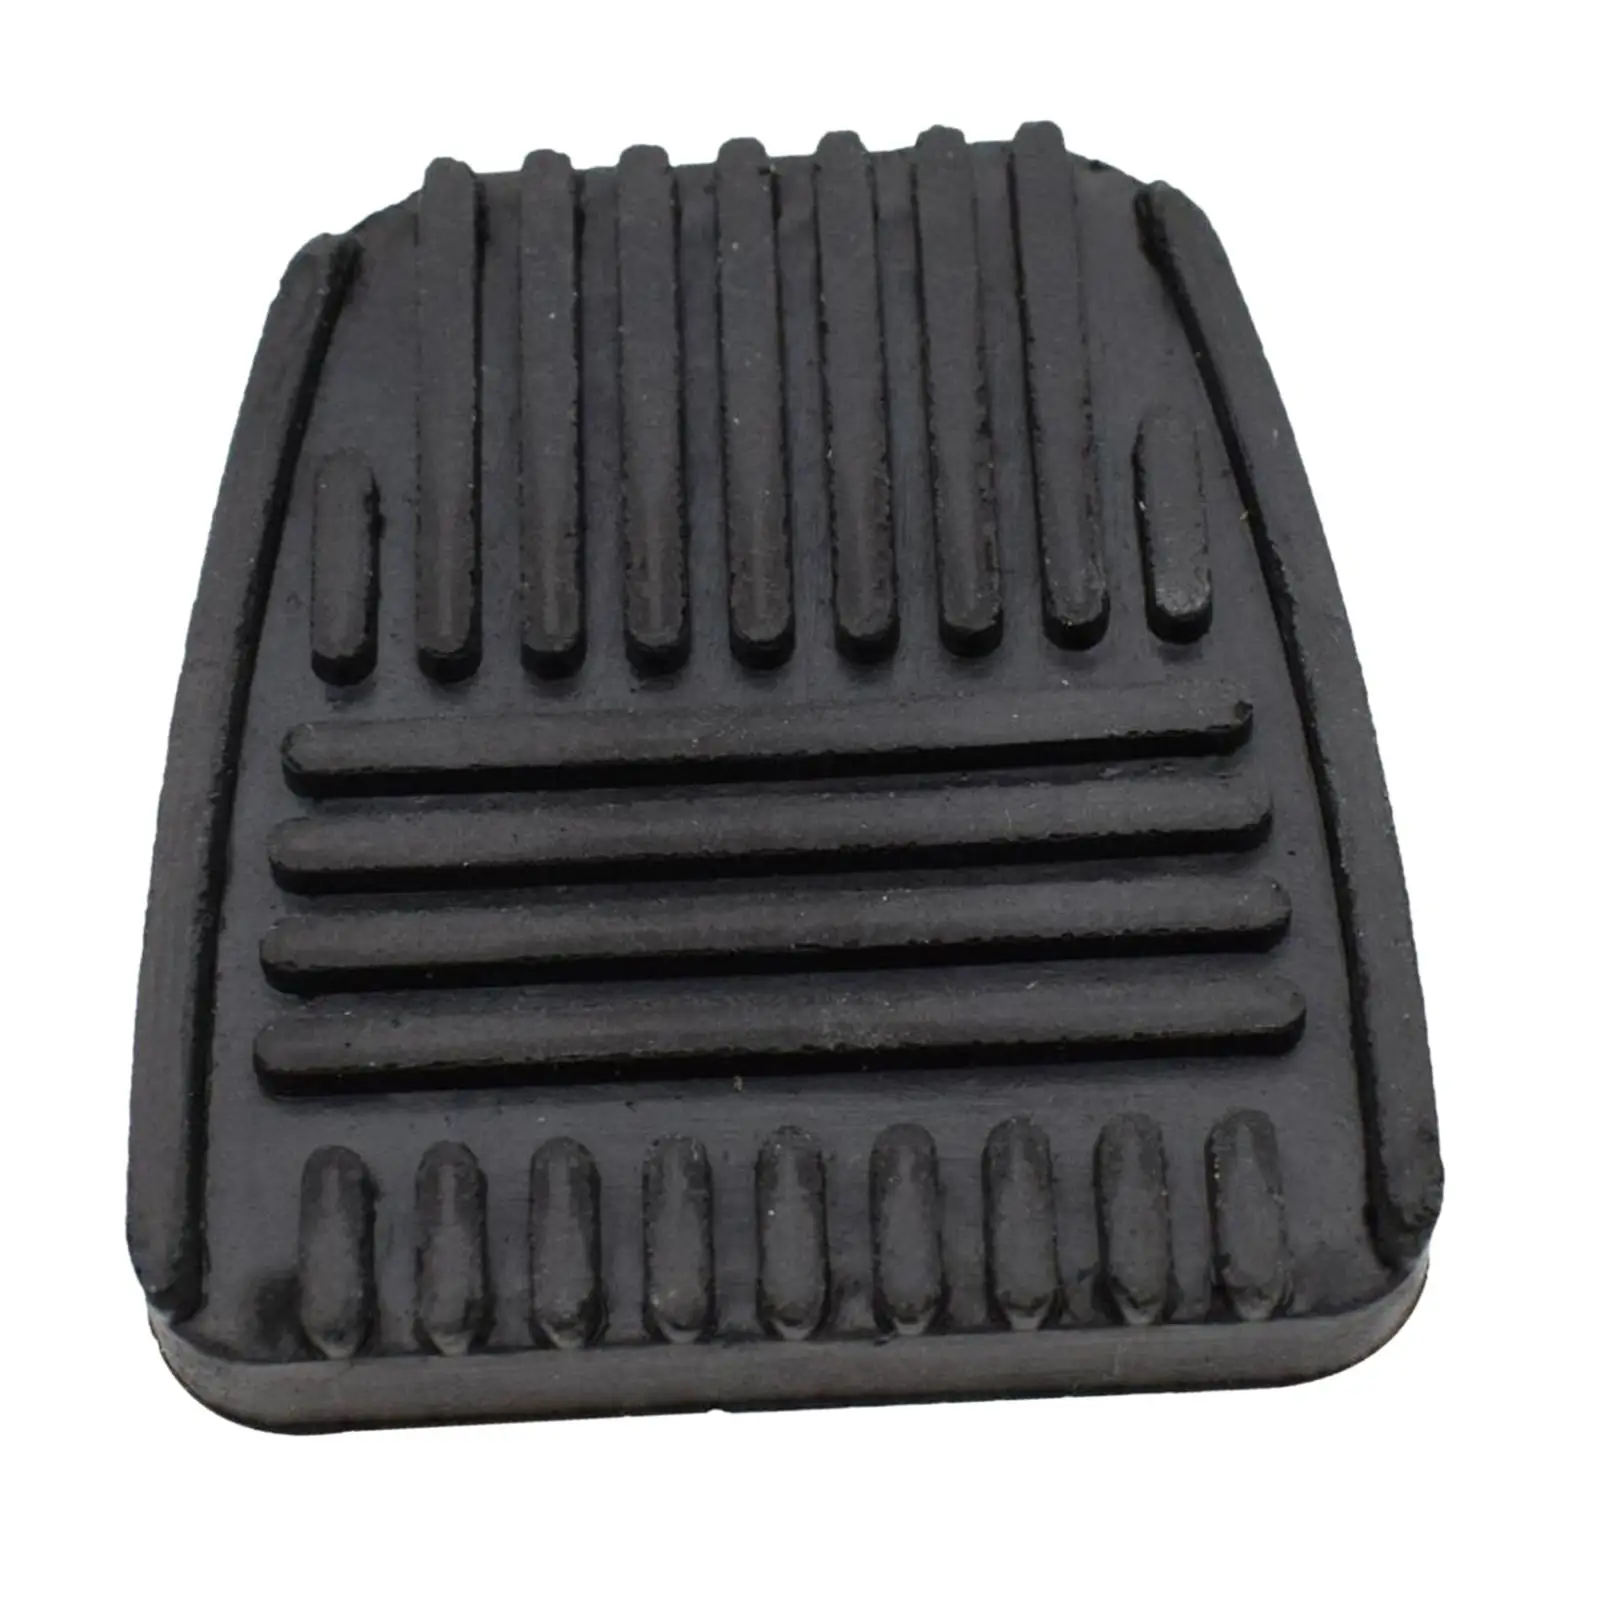 Brake Pedal Pad Replacement 31321-14020 for Toyota for land cruiser Paseo